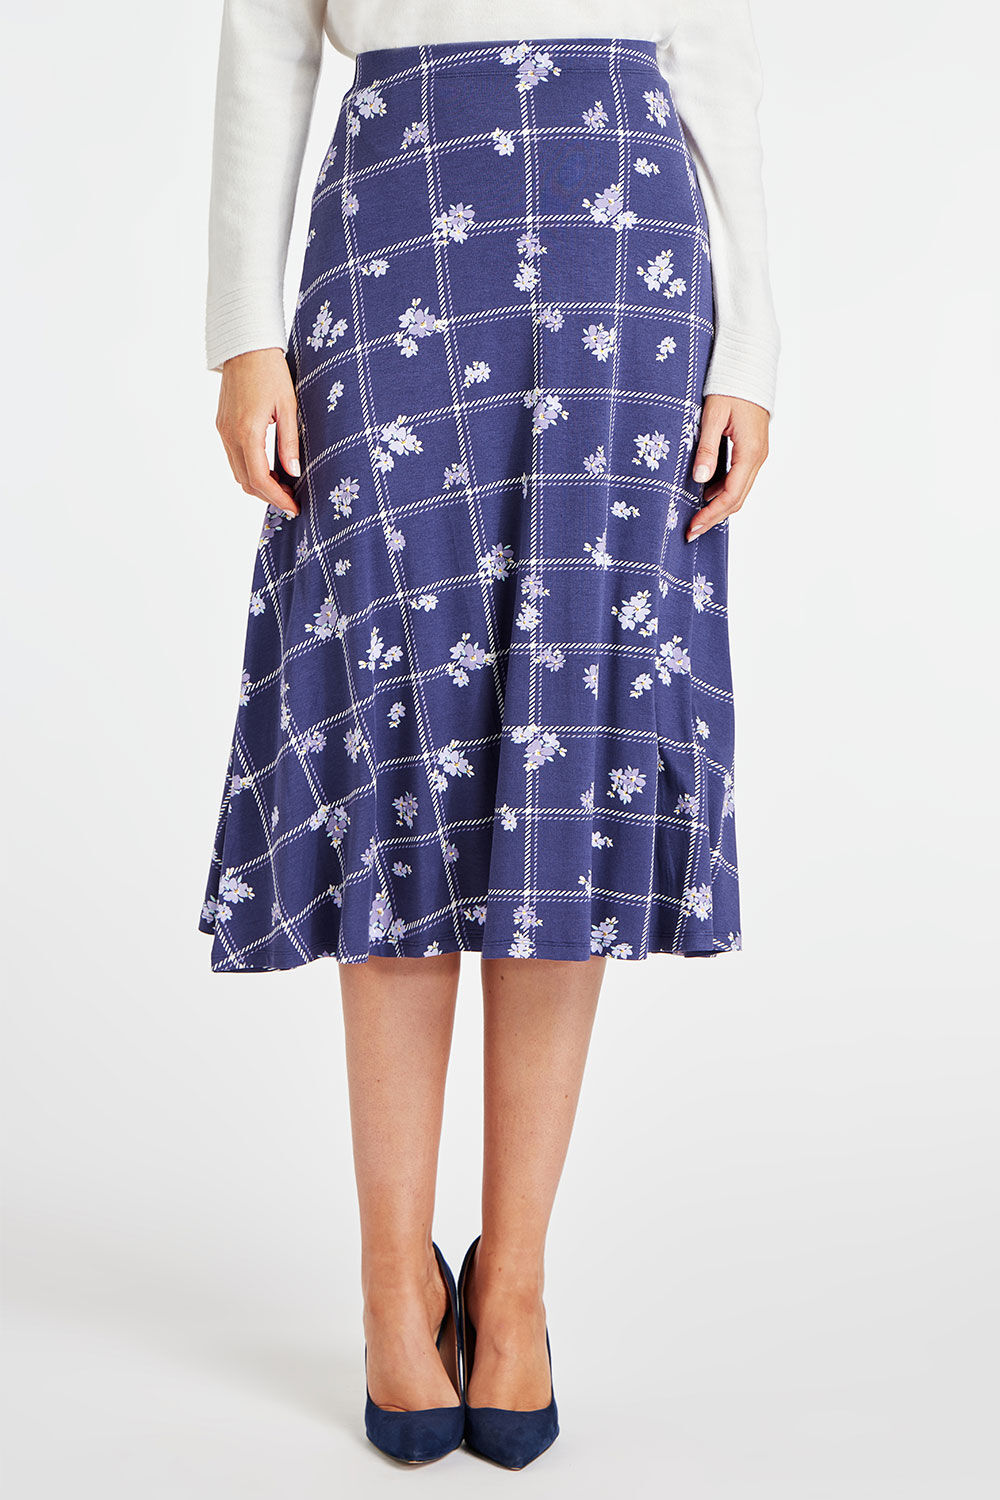 Bonmarche Navy Checked Floral Print Jersey Elasticated Flippy Skirt, Size: 12